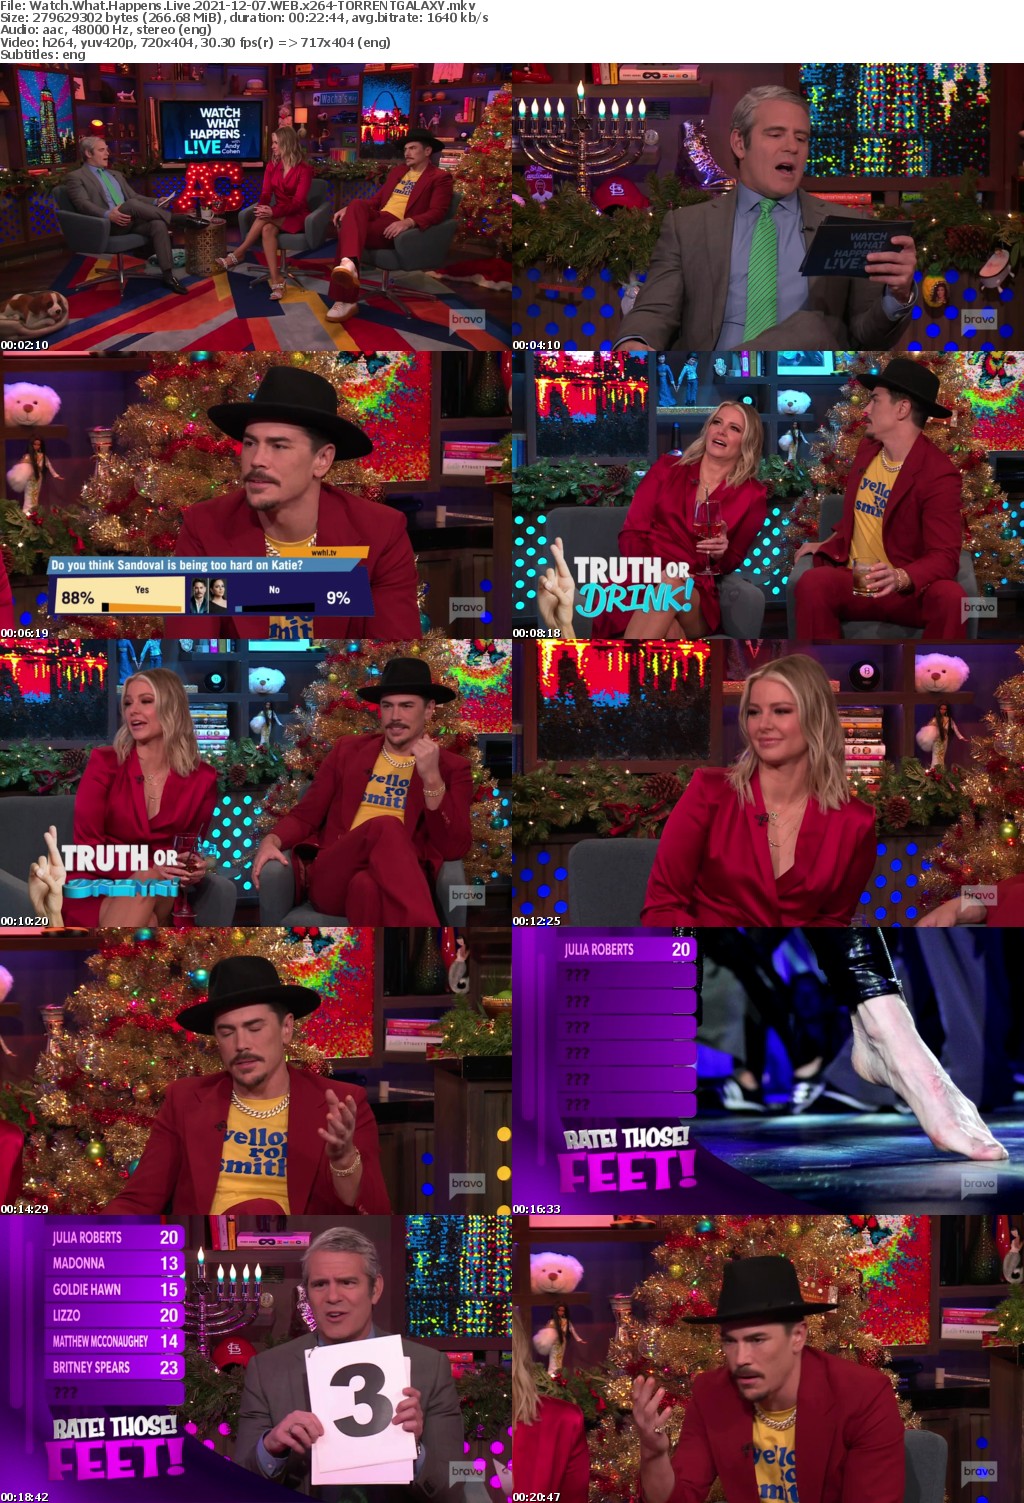 Watch What Happens Live 2021-12-07 WEB x264-GALAXY